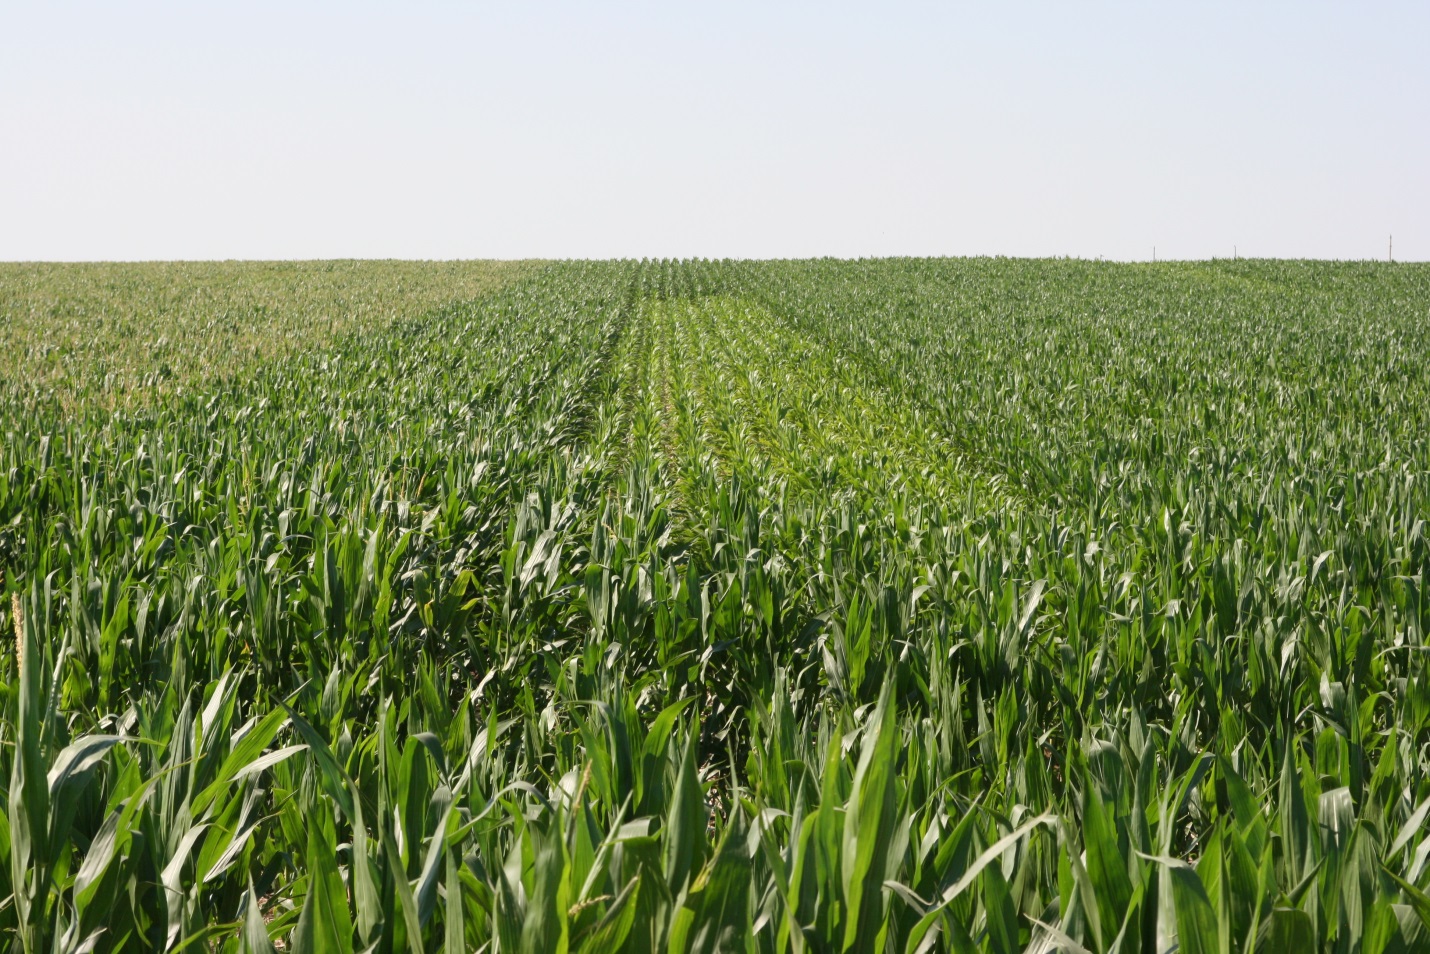 CATCH THE BUZZ – Sweeping Study of US Farm Data Shows Loss of Crop Diversity the Past 34 Years